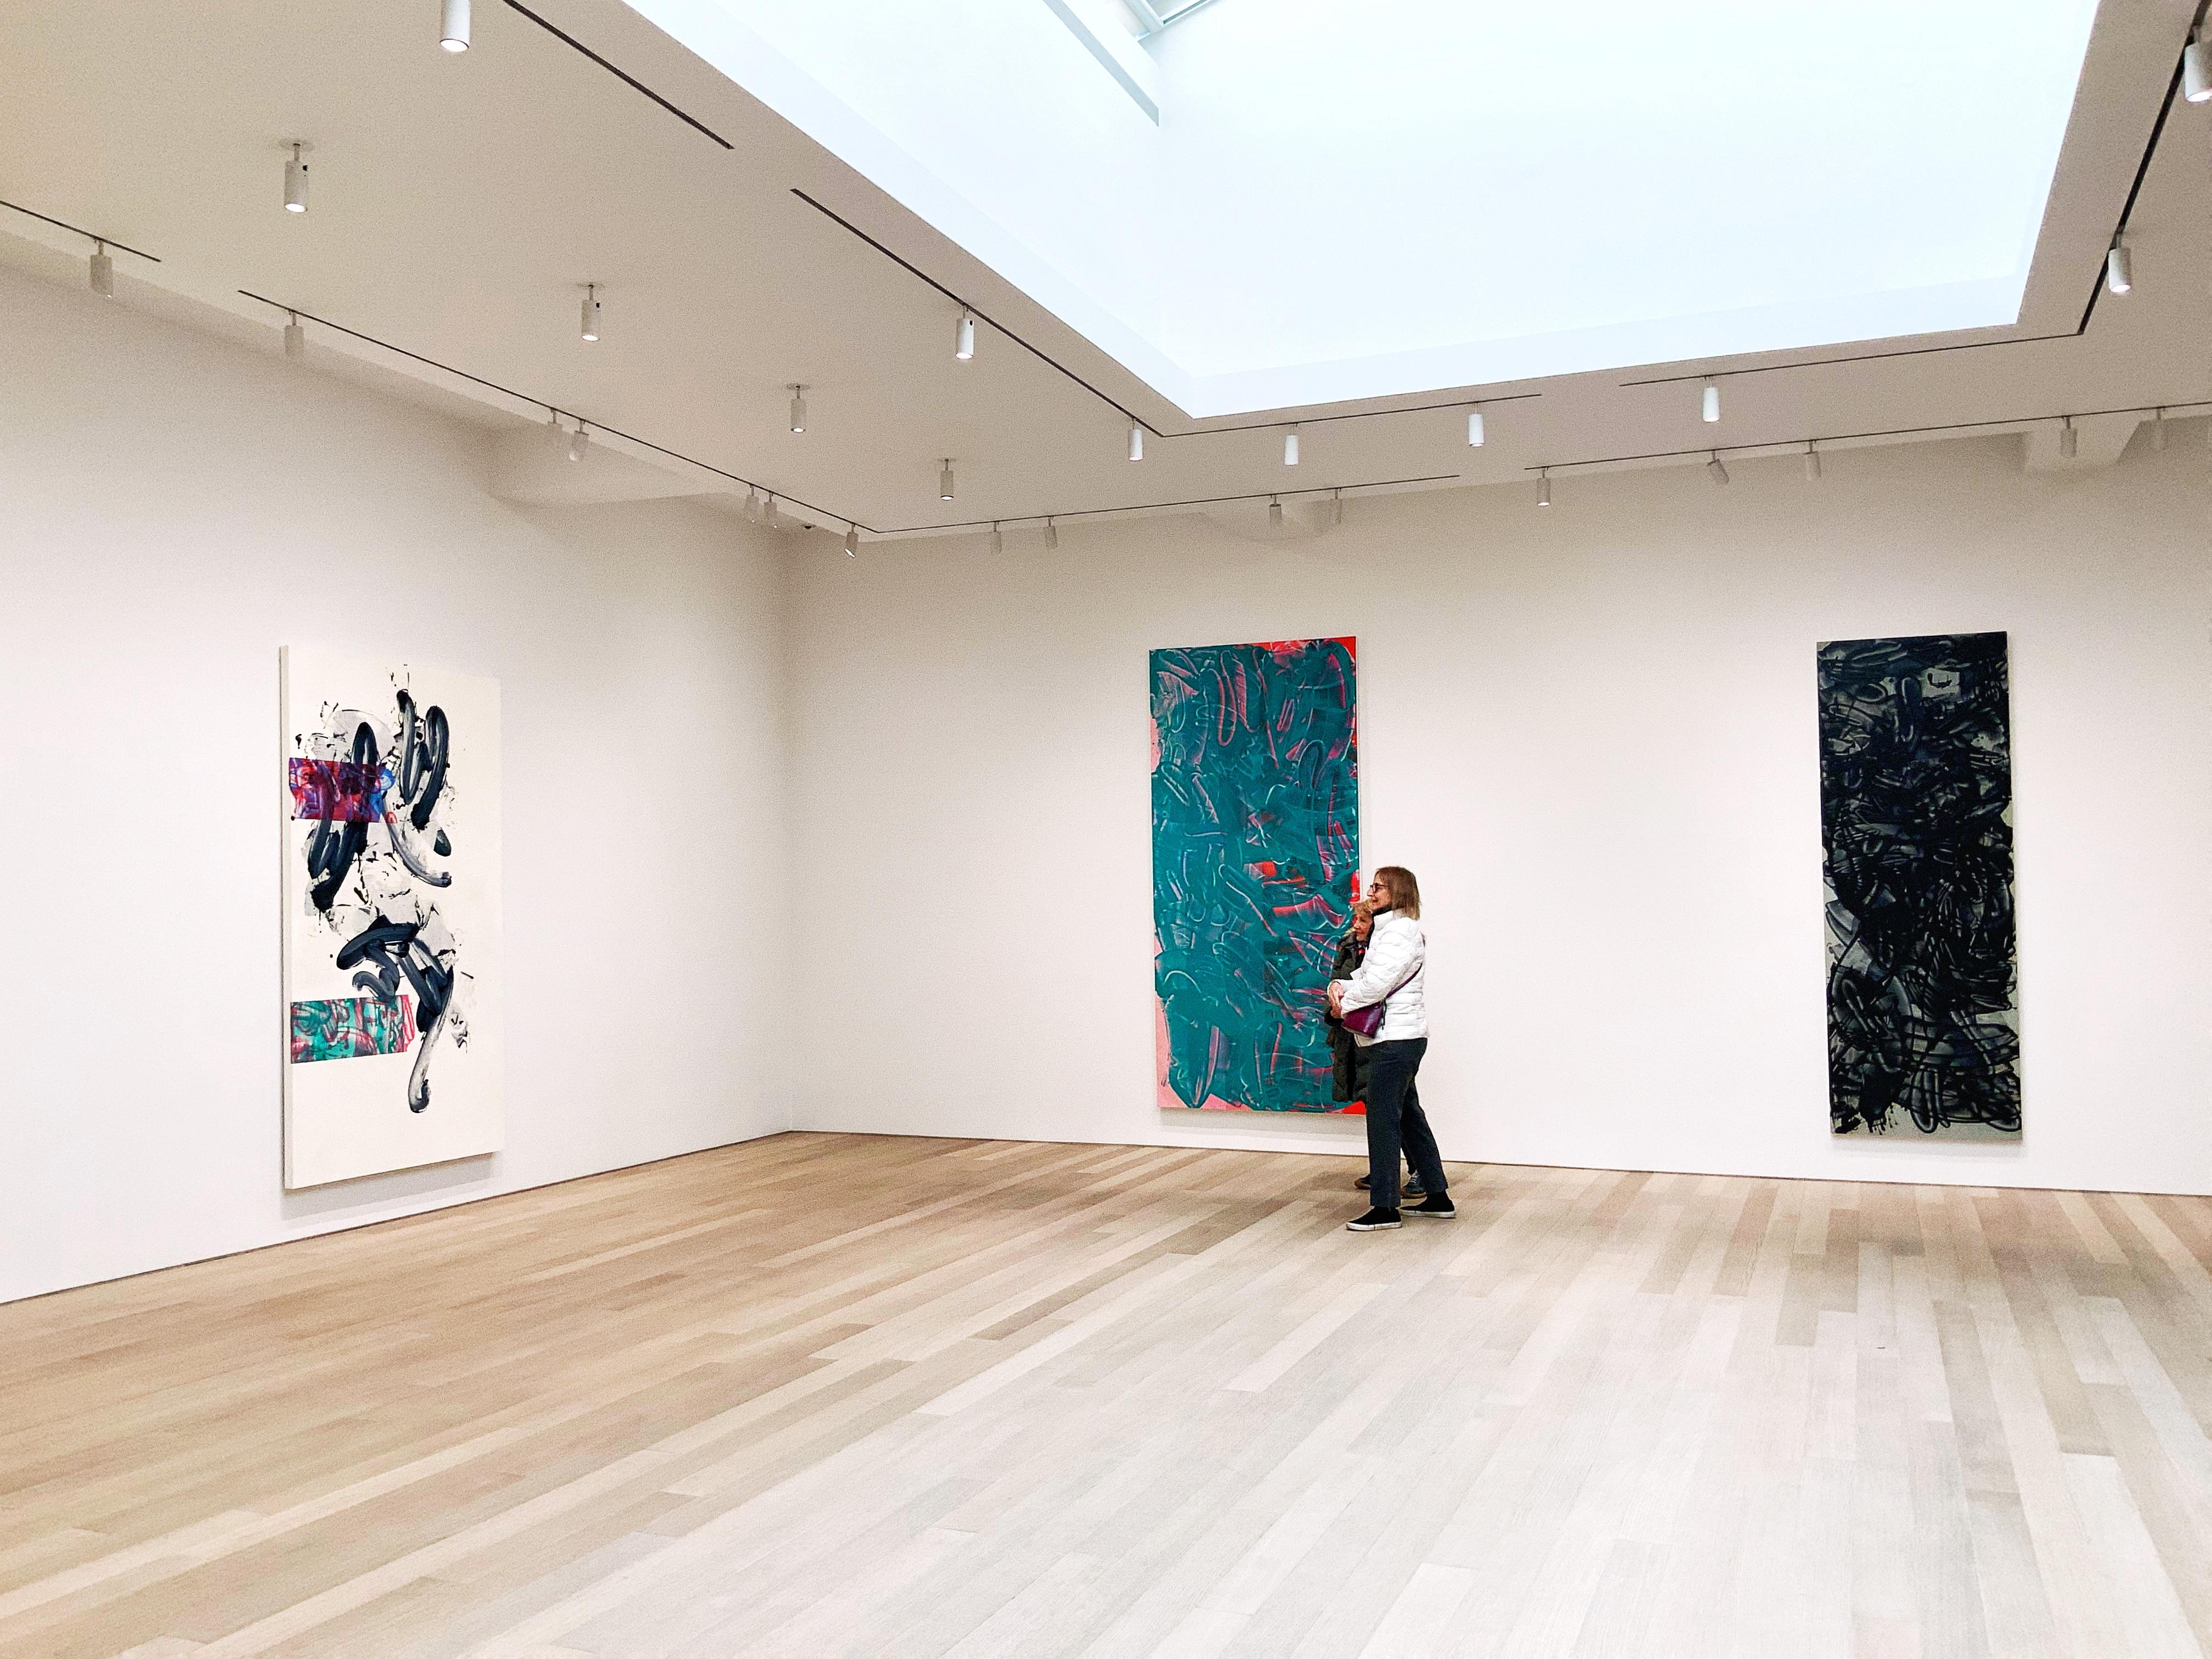 Show and Tell: Tour the Best Contemporary Art Galleries in NYC